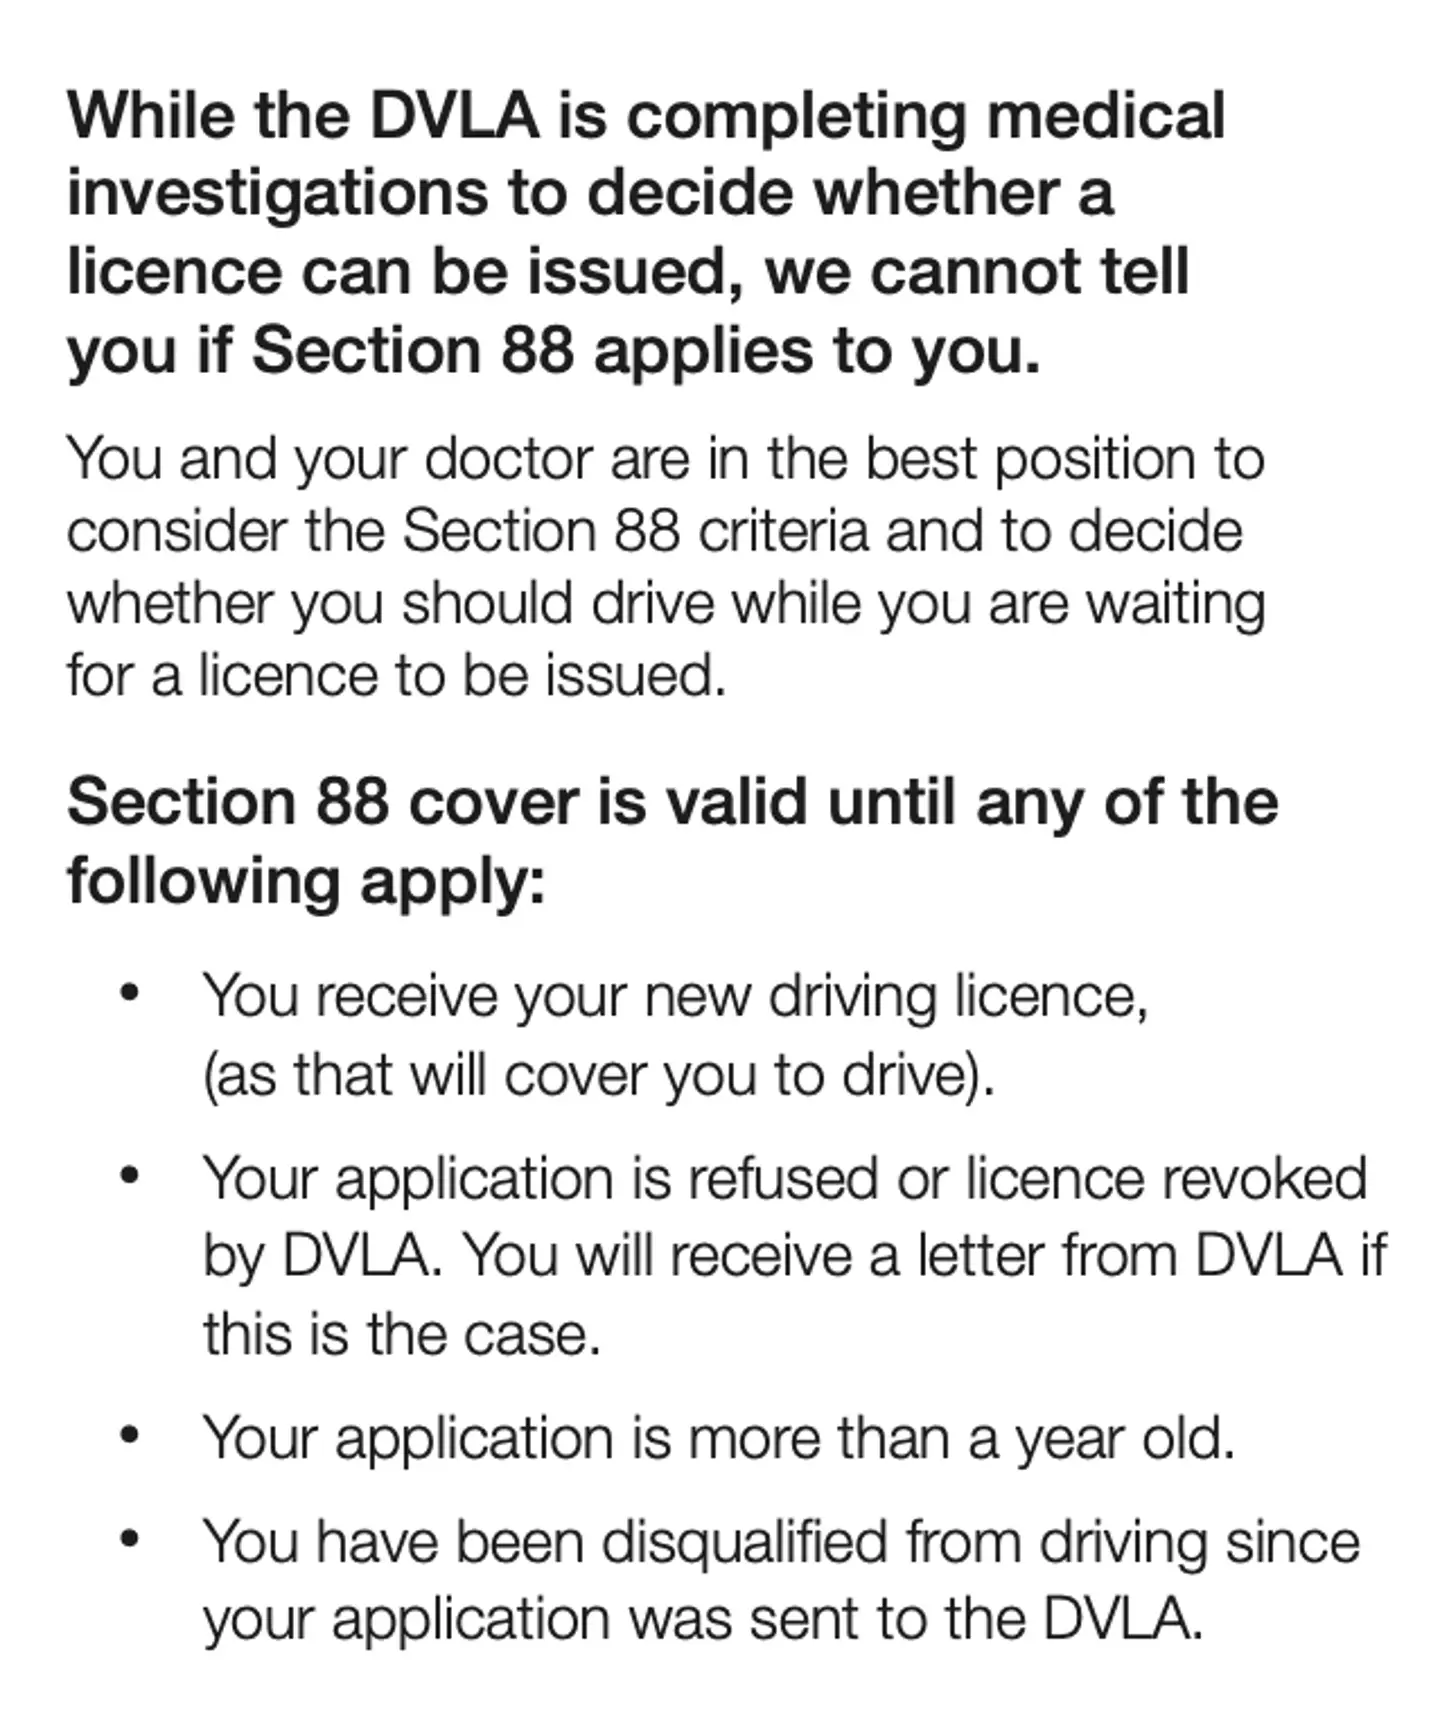 Section 88 allows motorists to continue driving even though they do not hold a current driving licence (